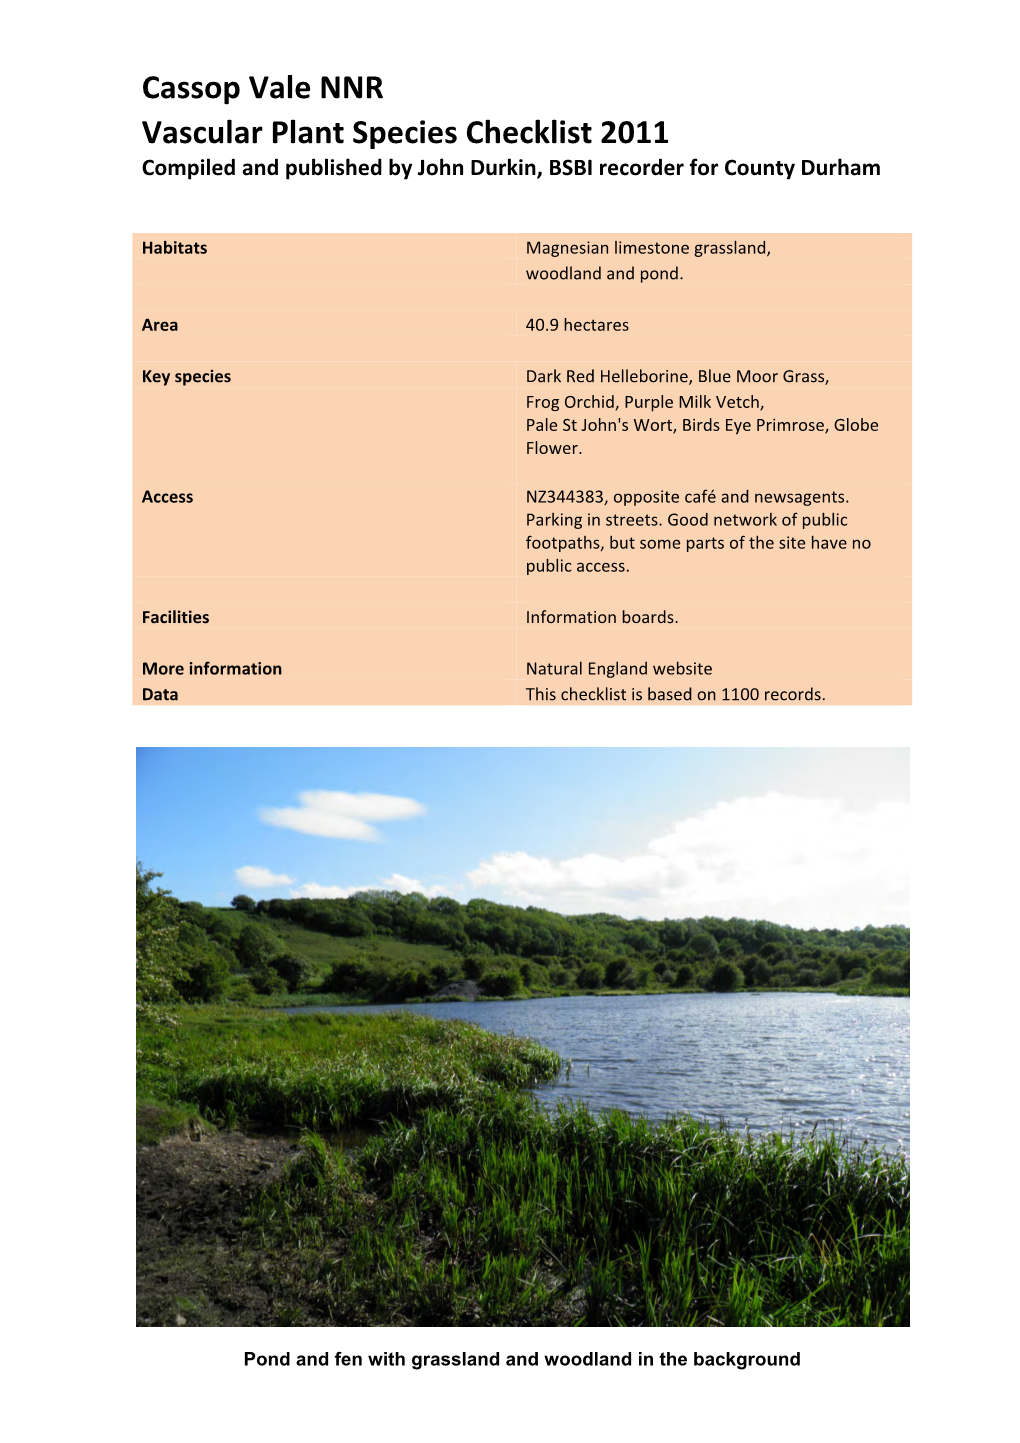 Cassop Vale NNR Vascular Plant Species Checklist 2011 Compiled and Published by John Durkin, BSBI Recorder for County Durham